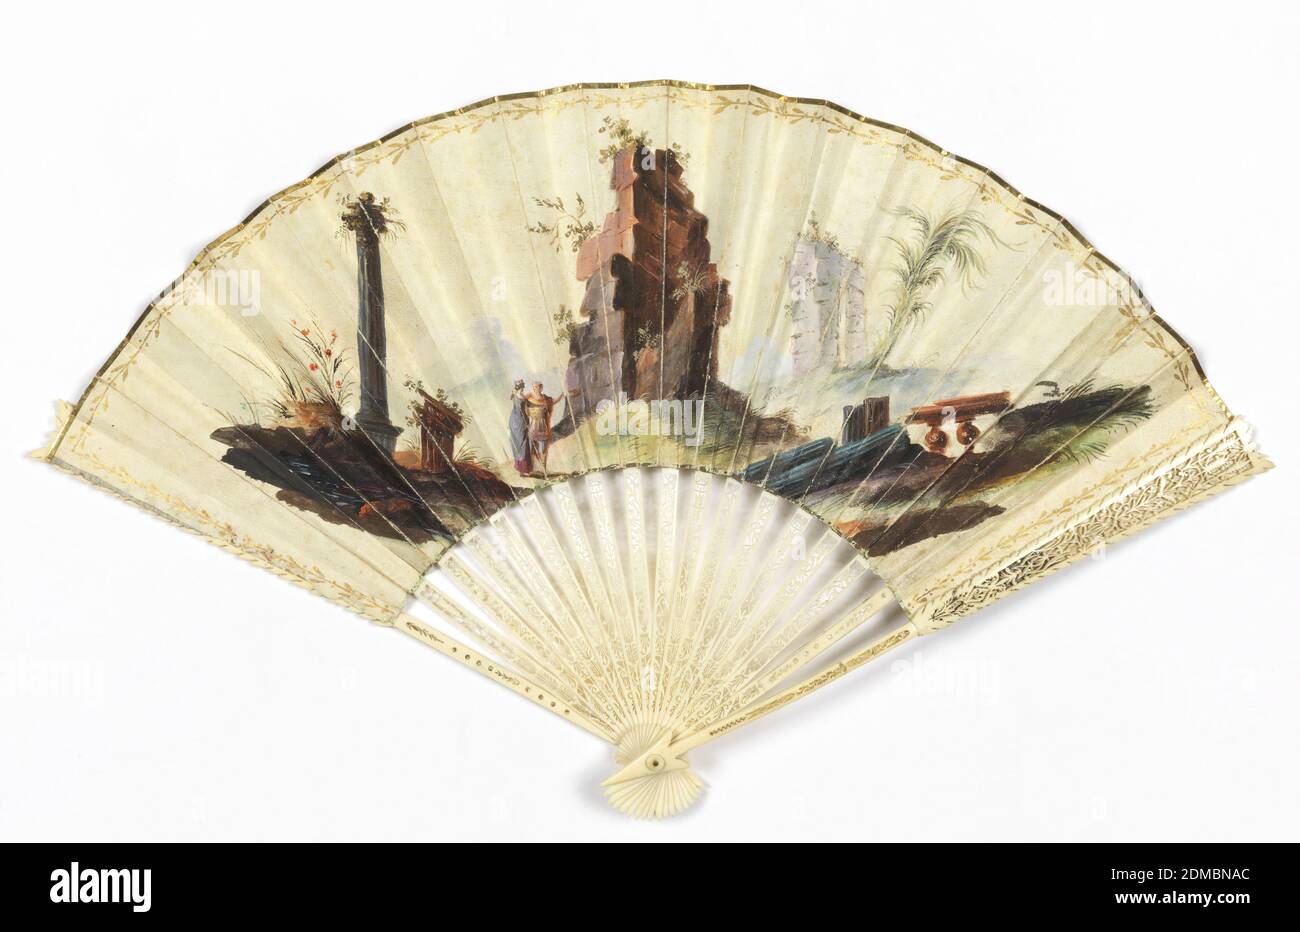 Pleated fan, Gilded parchment leaf painted with gouache, ivory sticks carved à jour, carved and pierced ivory guards overlaid with gold foil, ivory button at rivet, Pleated fan. Gilded parchment leaf painted with gouache. Obverse: classical scene illustrating the sacrifice of Iphigenia showing a sorrowing warrior at left; at center, a sacrificial altar to which the aged priest Colchas leads the weeping Iphigenia, while above in the clouds are Artemis with a deer; at right, a warrior and two female figures, watching the heavenly apparition. Narrow, gilded borders of abstract design Stock Photo